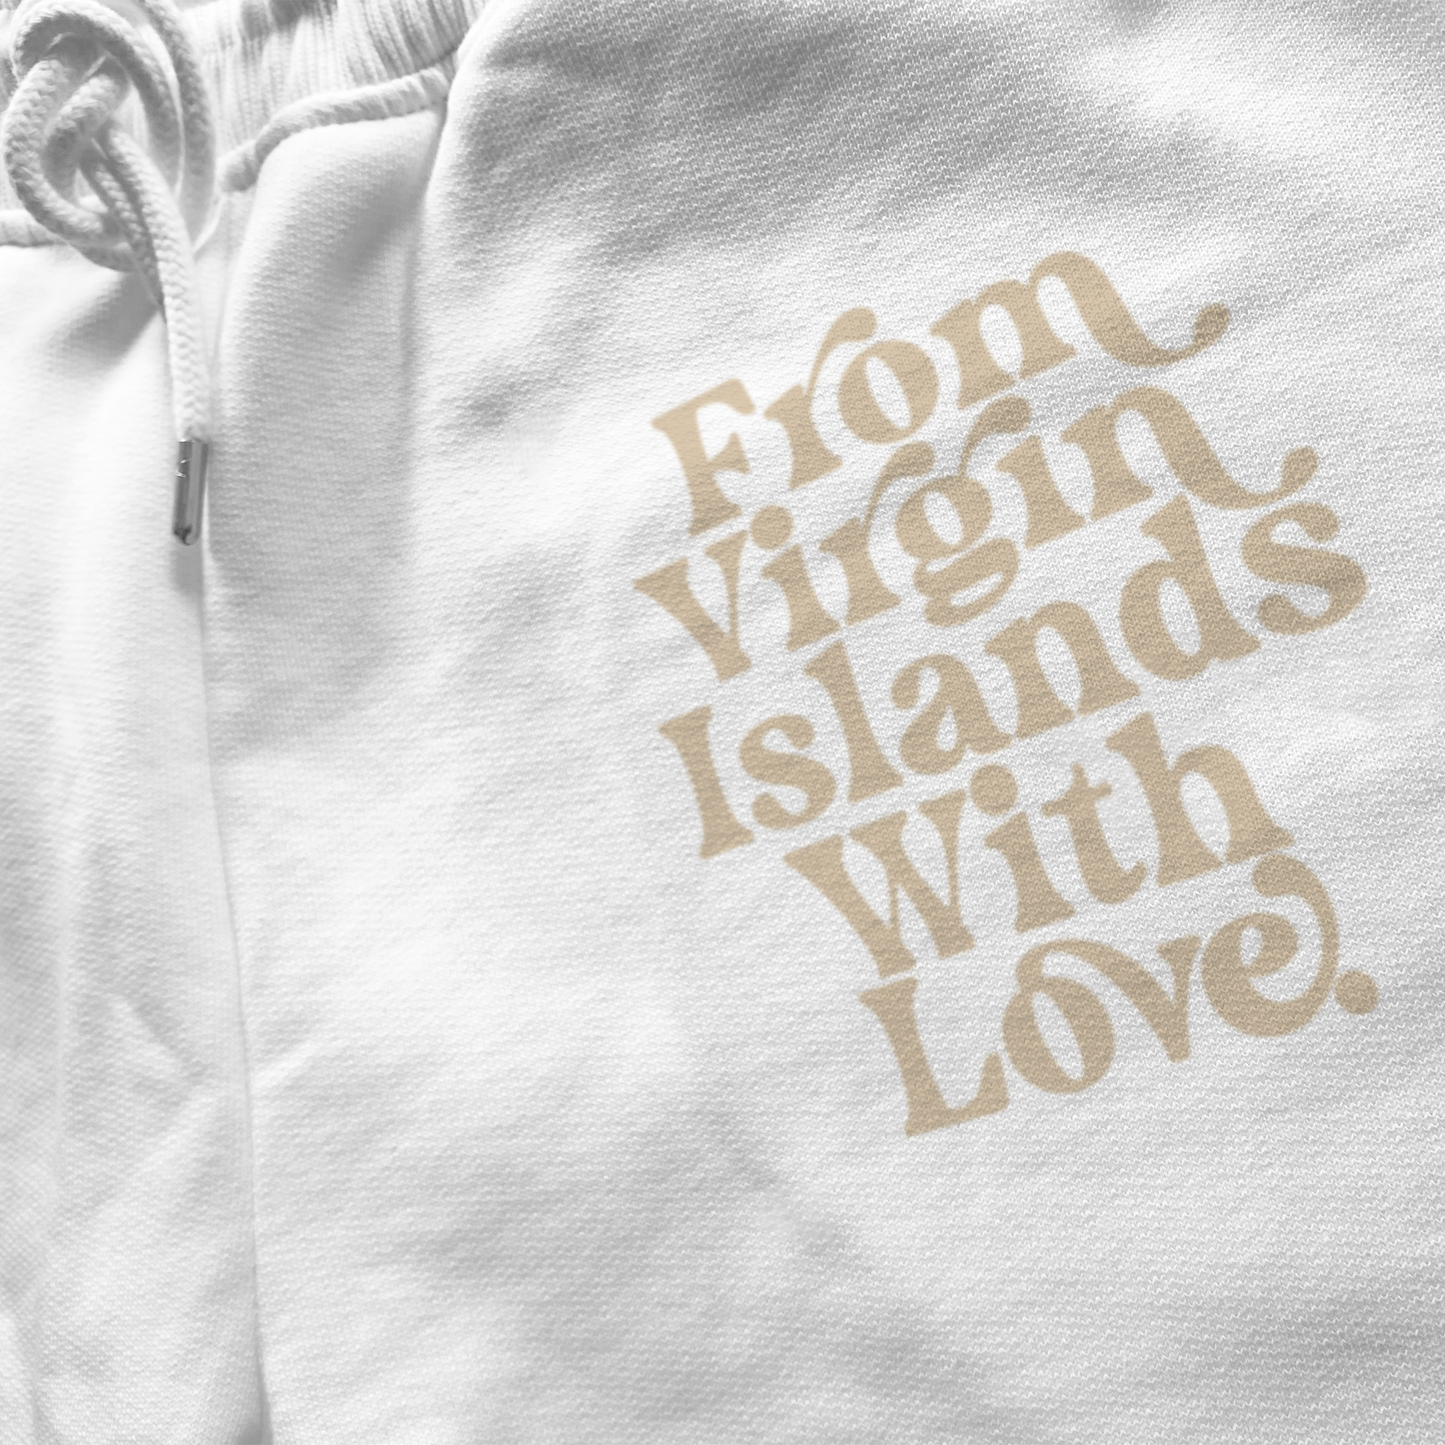 From Virgin Islands With Love Joggers (White Beige)